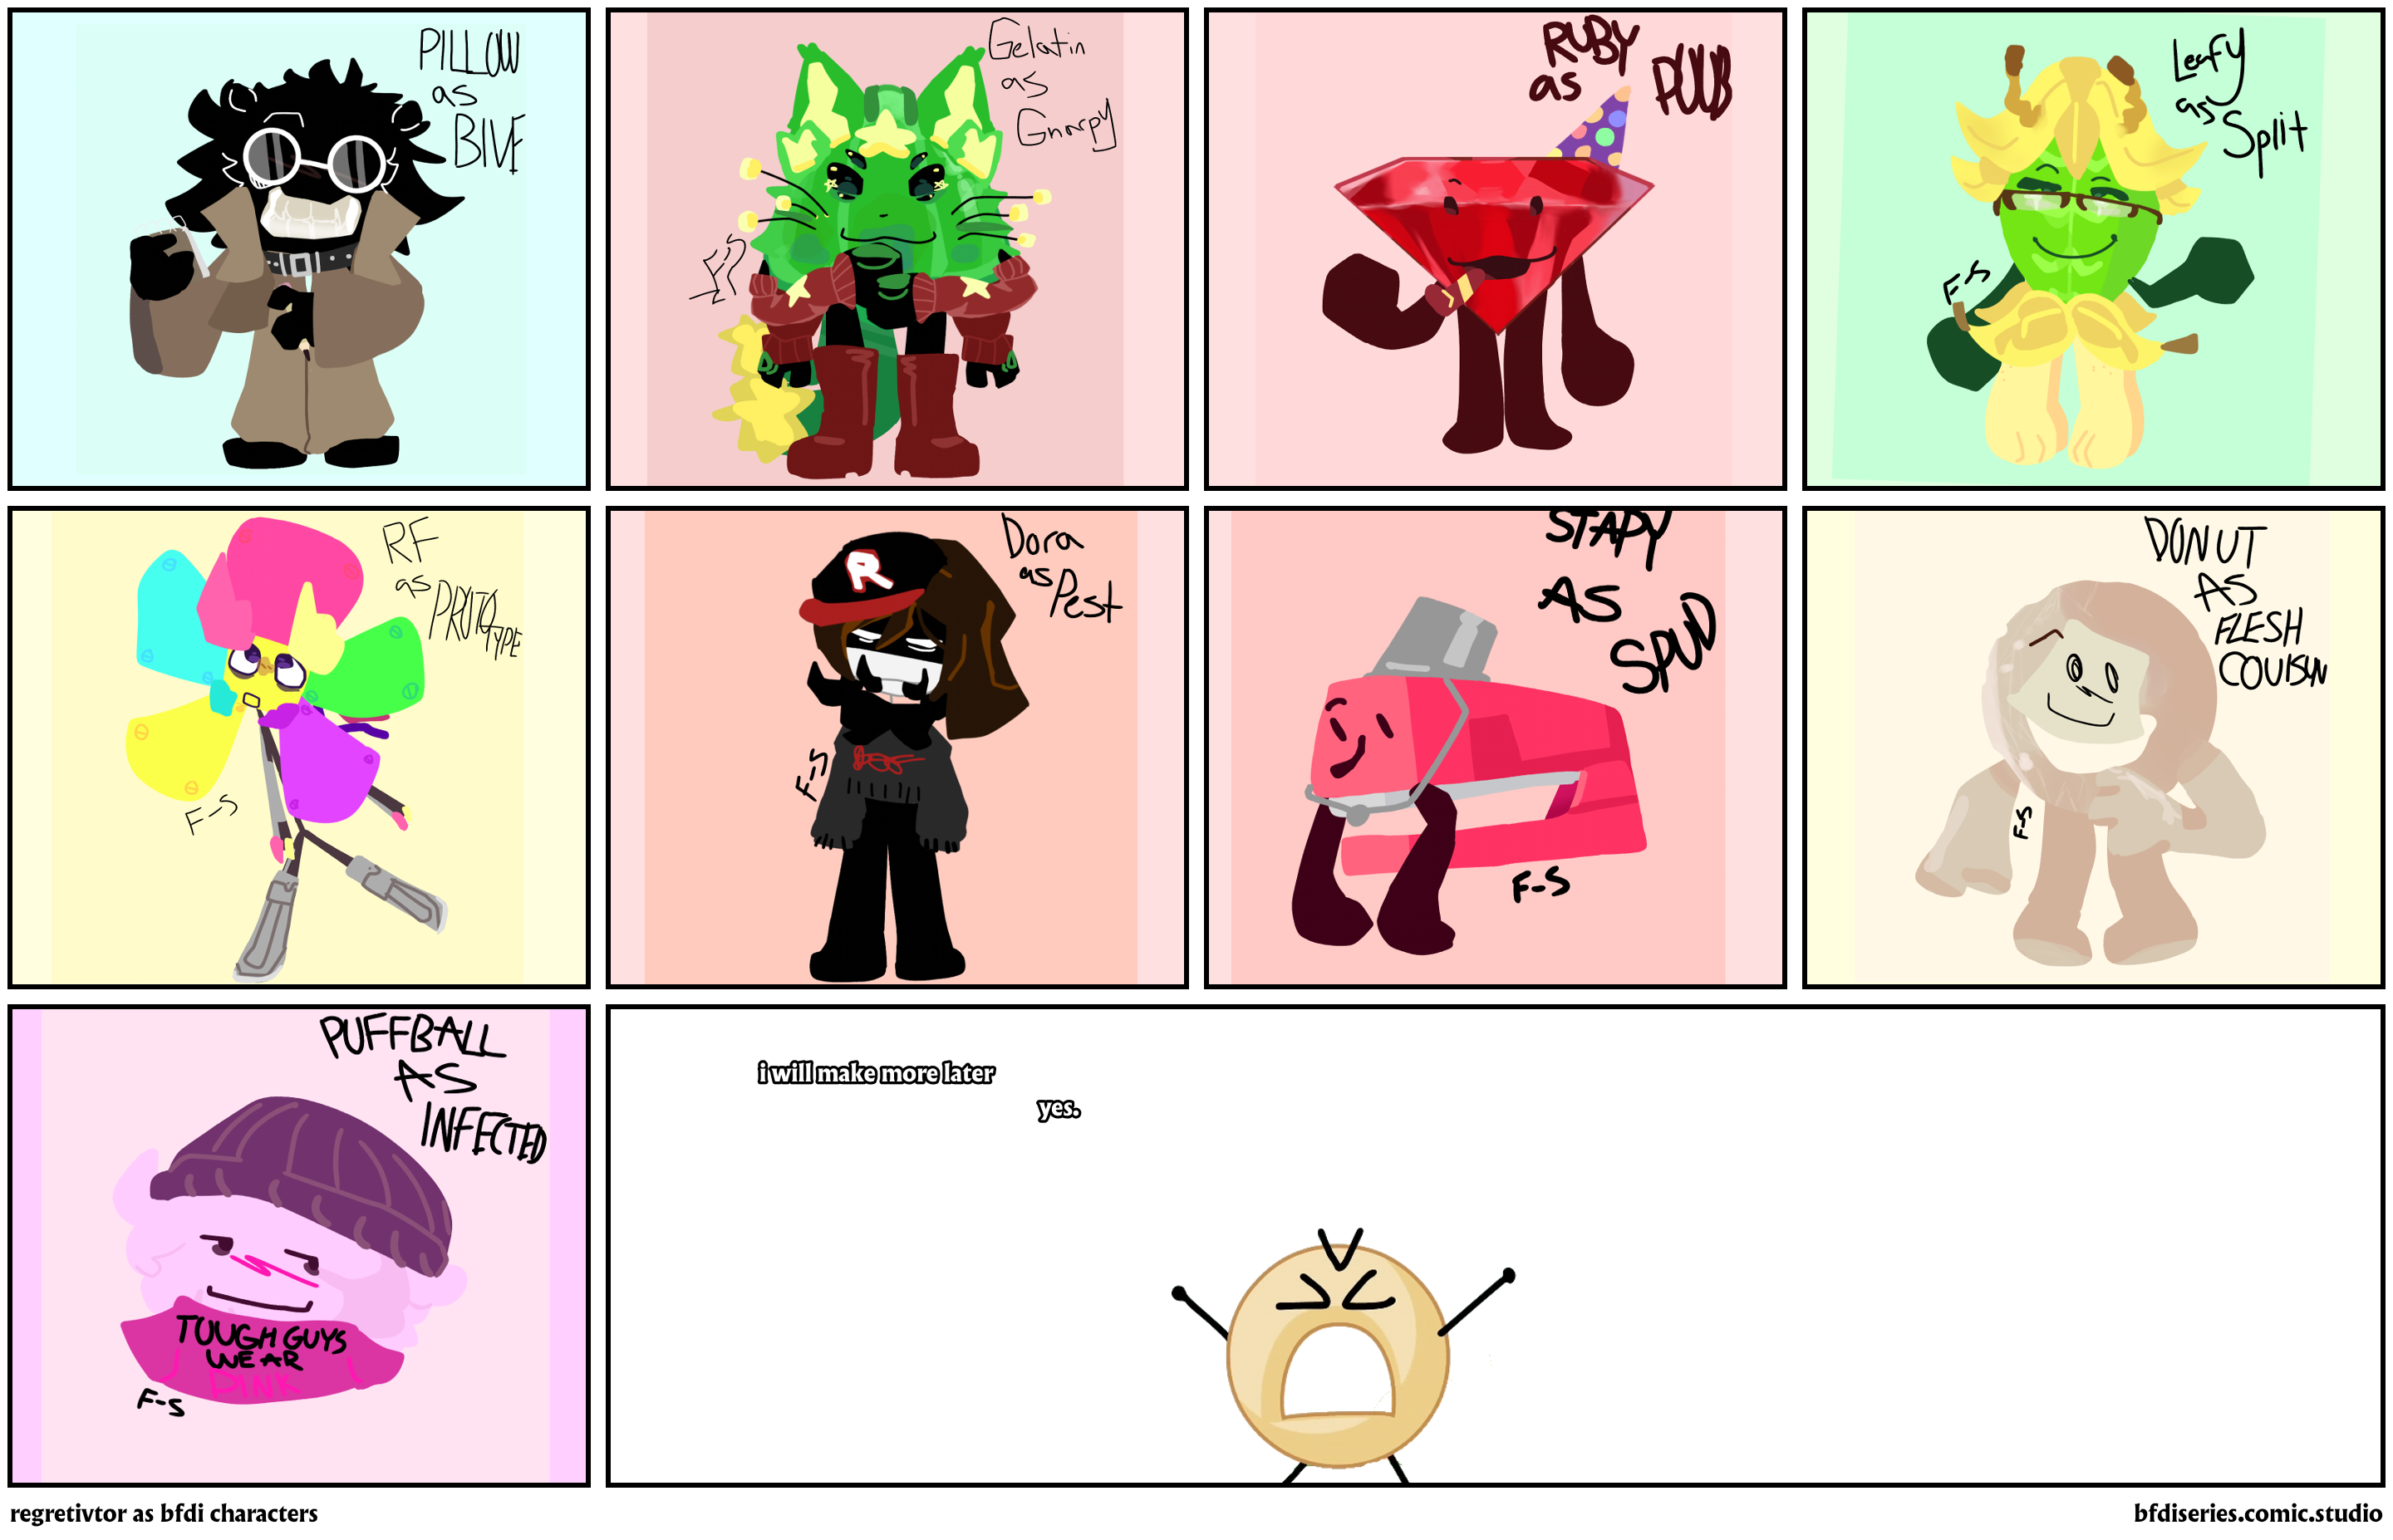 regretivtor as bfdi characters